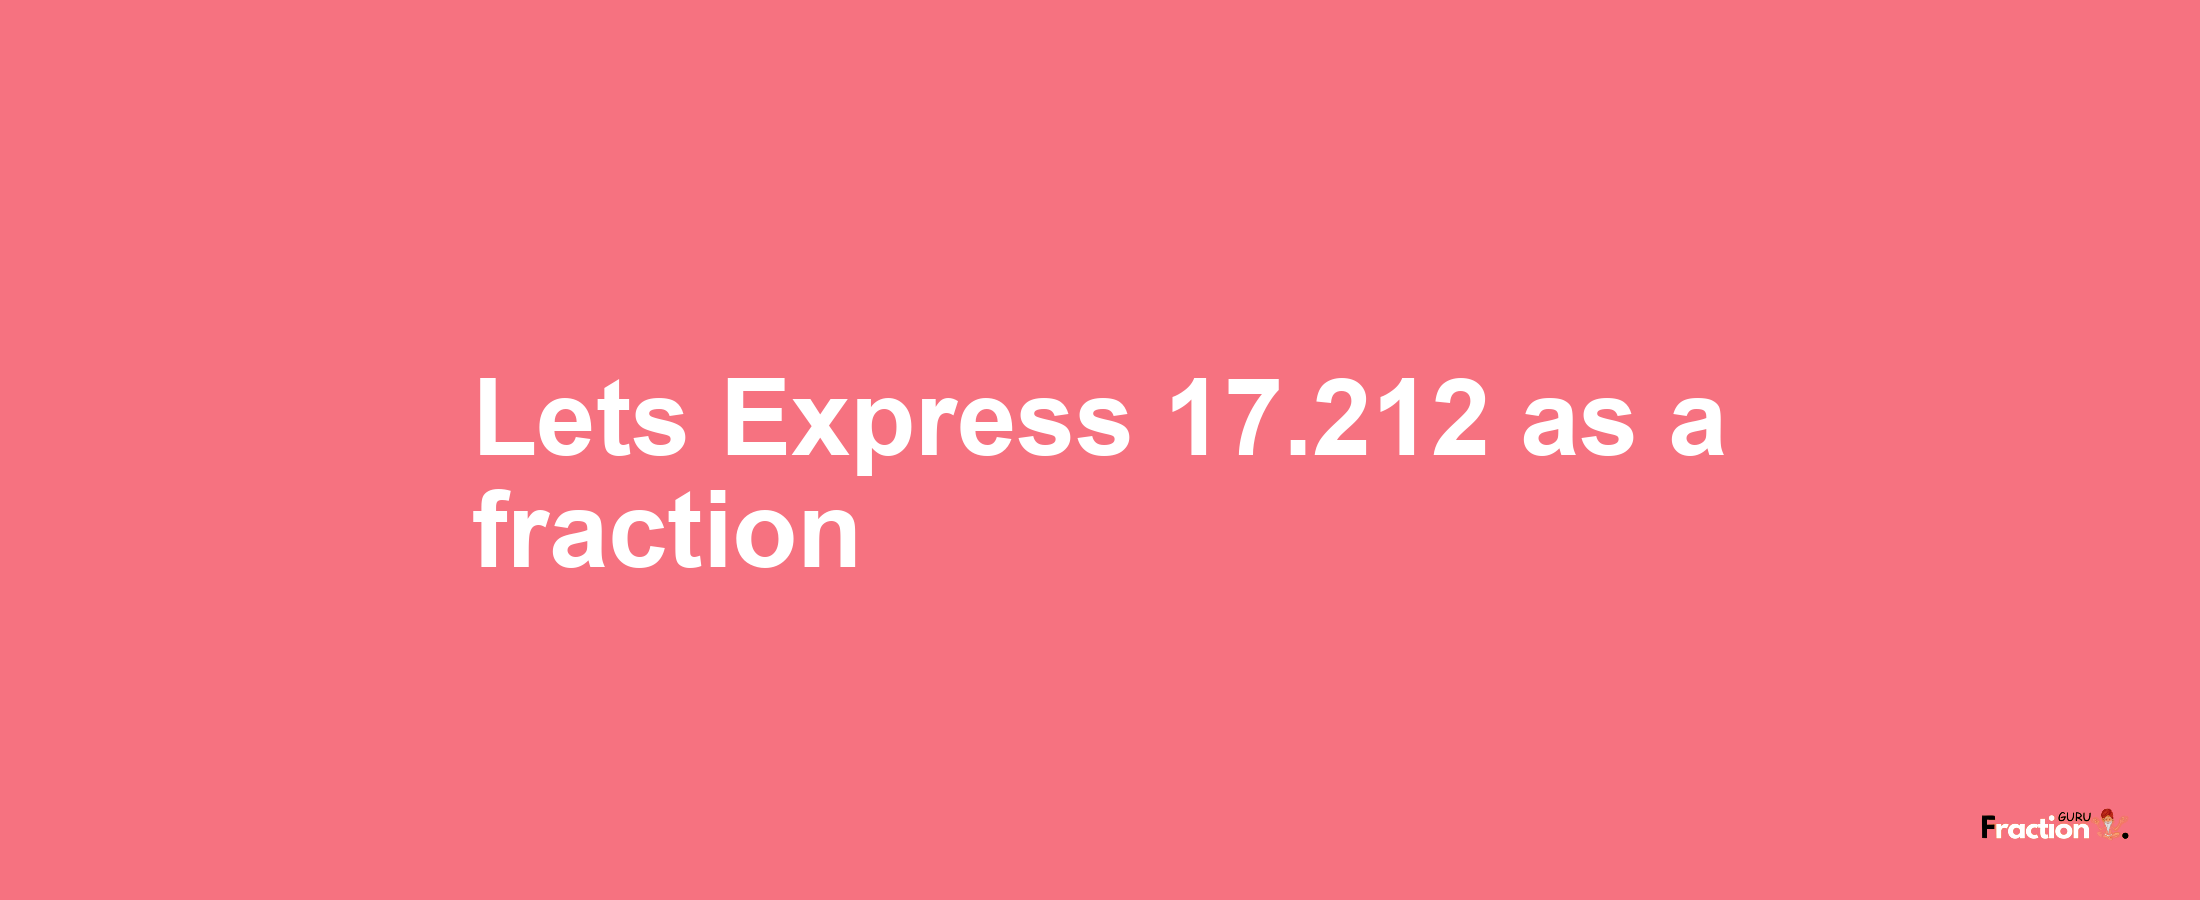 Lets Express 17.212 as afraction